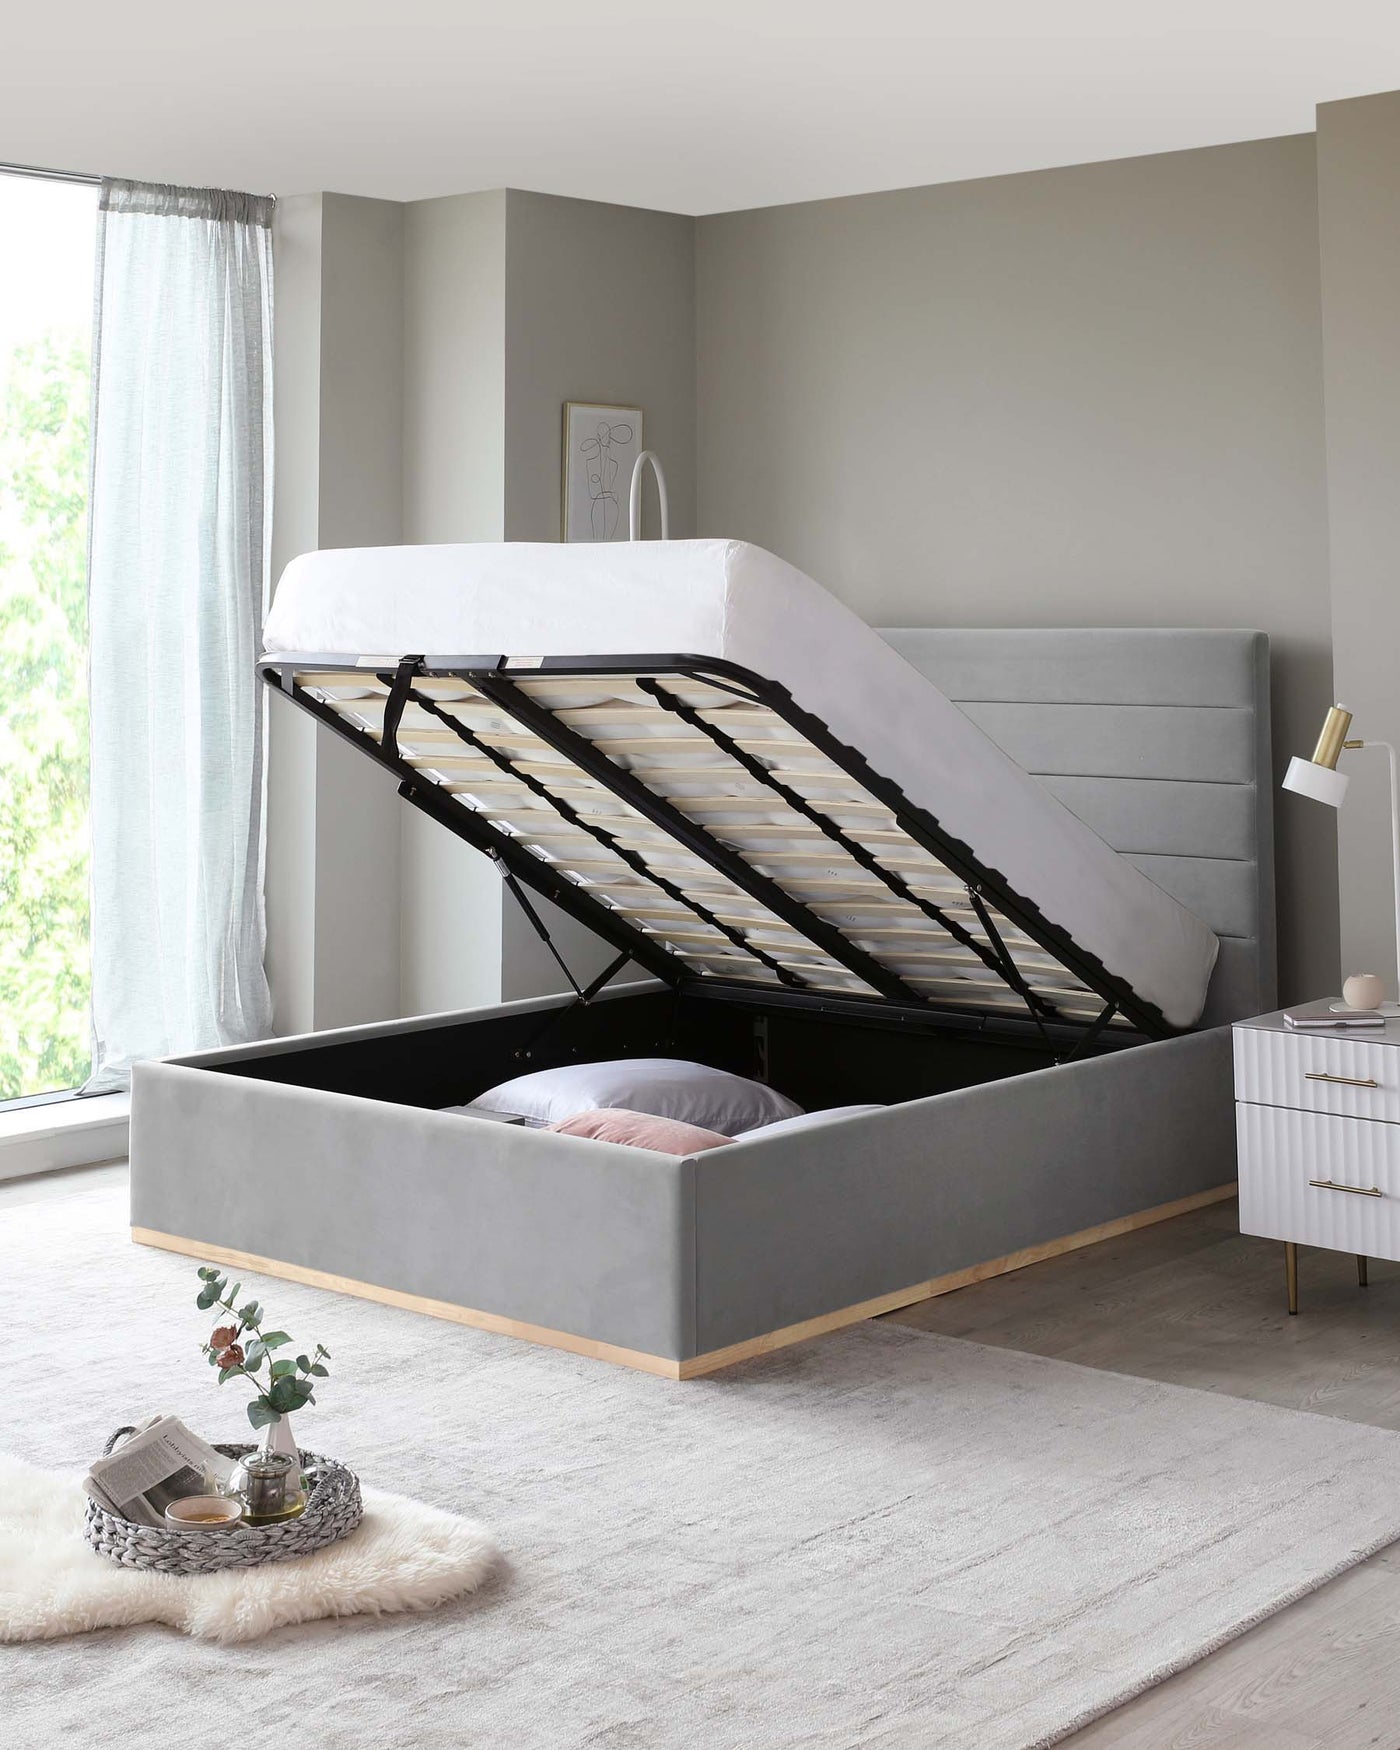 Modern grey upholstered storage bed with a lifted frame revealing under-mattress space on a light wooden floor, accompanied by a sleek white bedside table with golden handles. A cosy rug, soft throw, and decorative items create an inviting atmosphere.